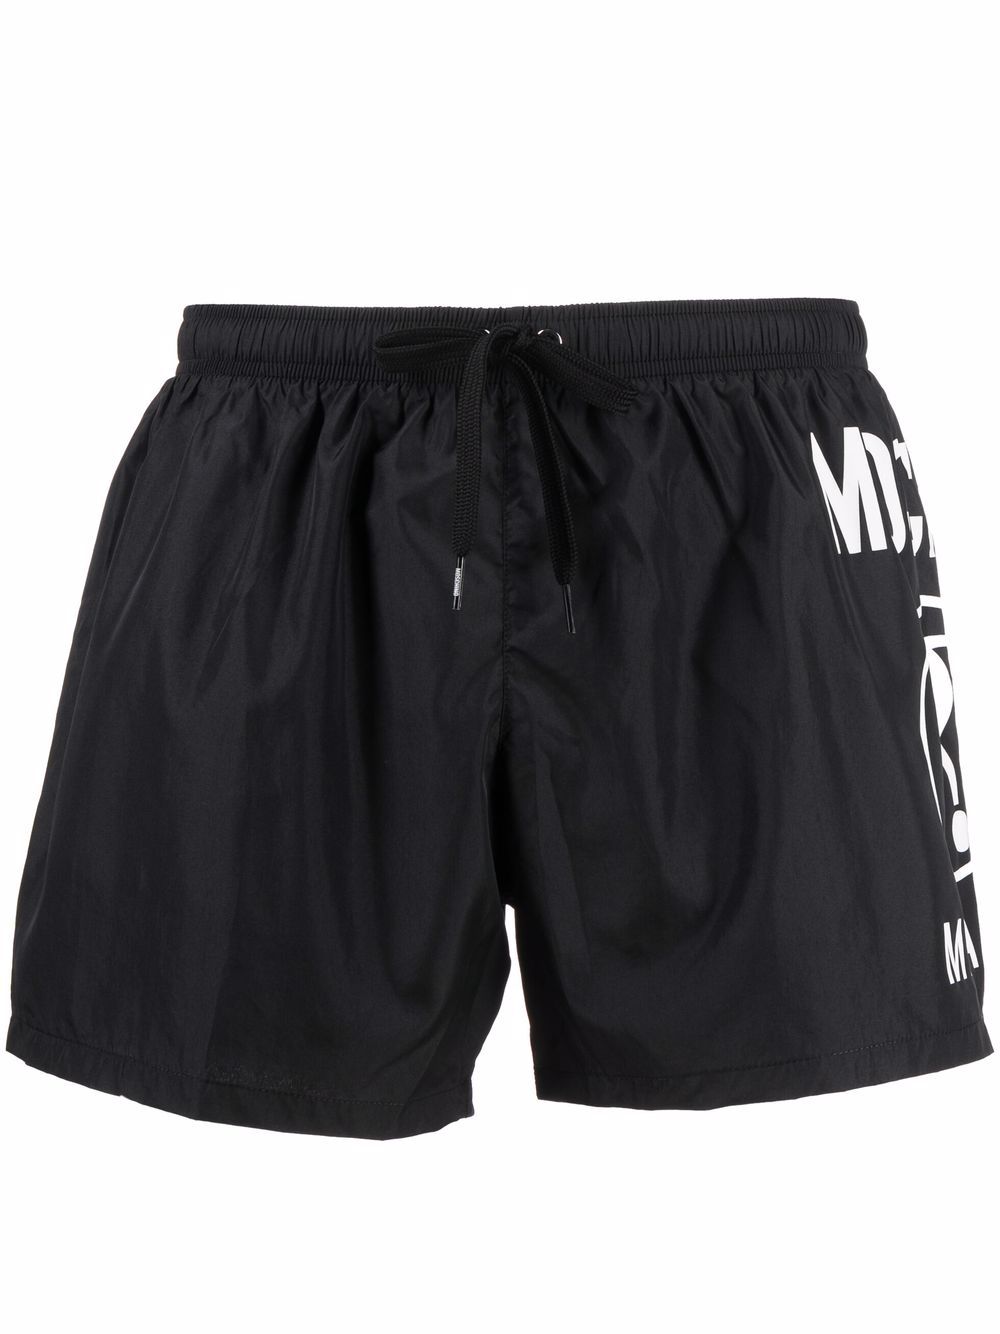 Shop Moschino logo print swim shorts with Express Delivery - FARFETCH